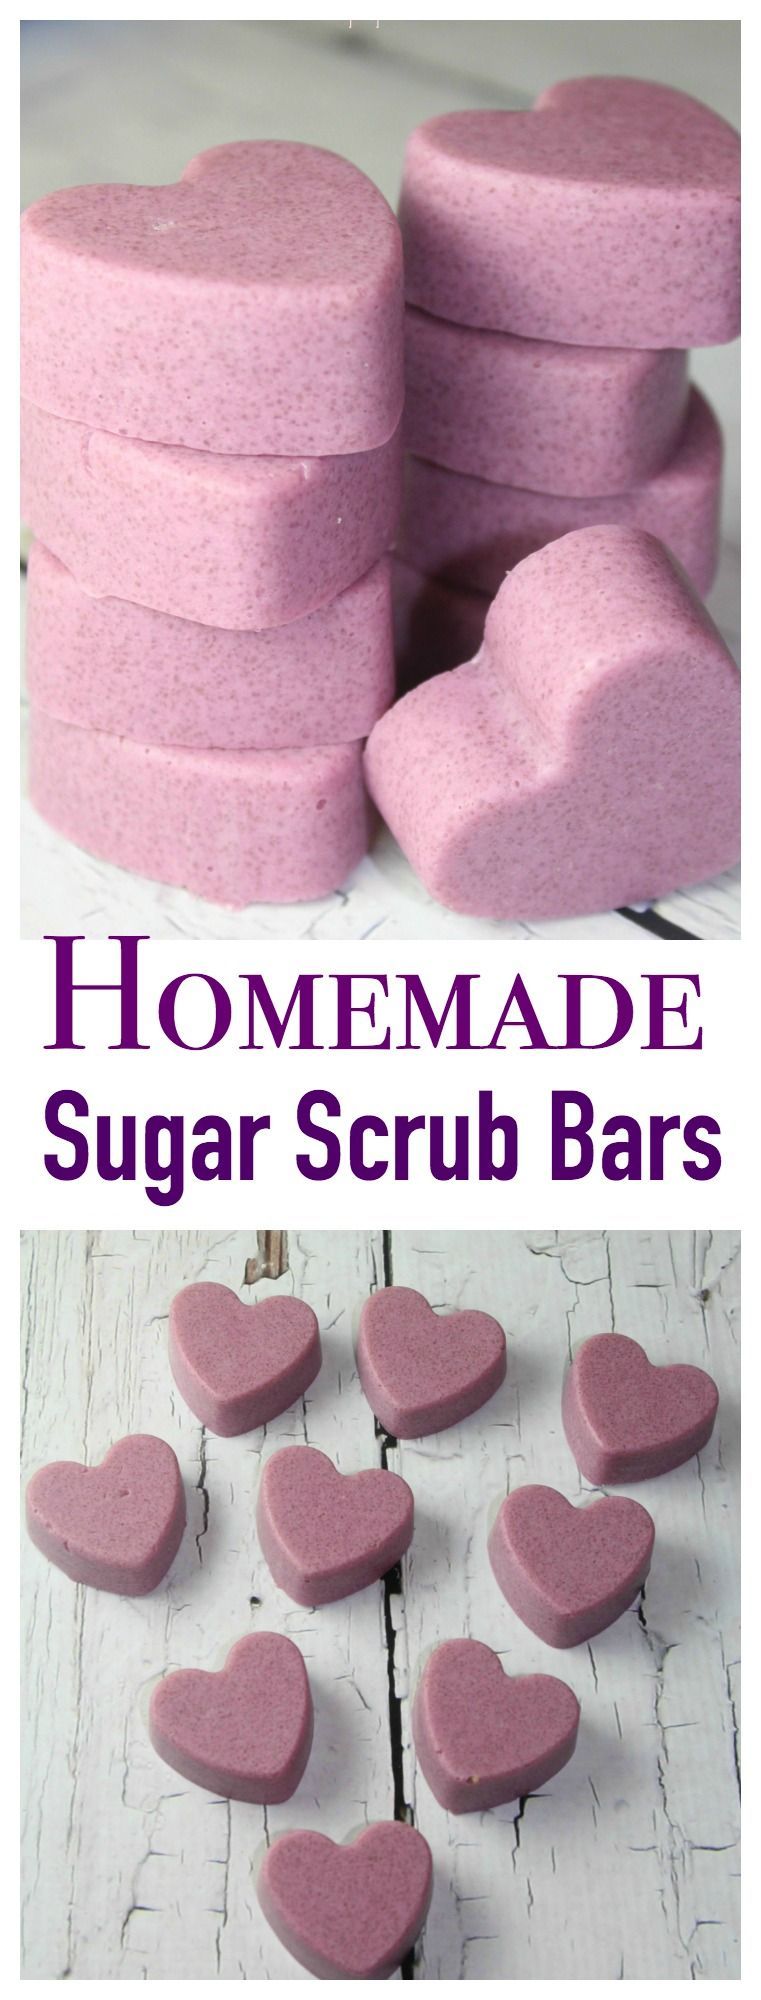 These Homemade Sugar Scrub Bars take ONLY minutes to make and great to give as gifts!